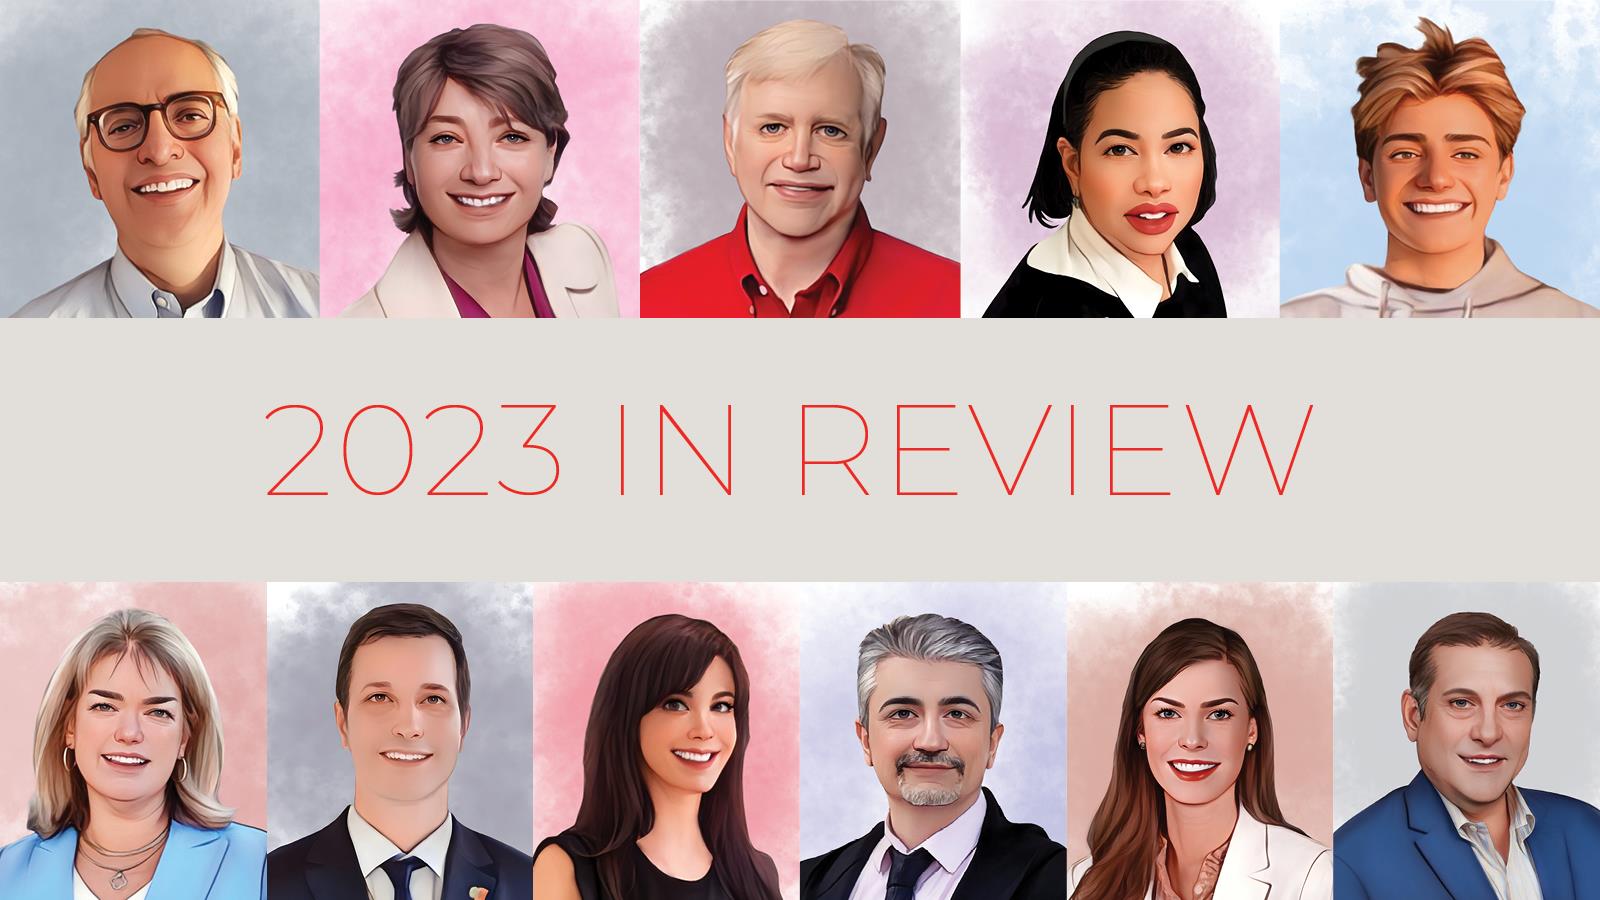 2023 Year in Review - illustrated portraits of 11 survey respondents